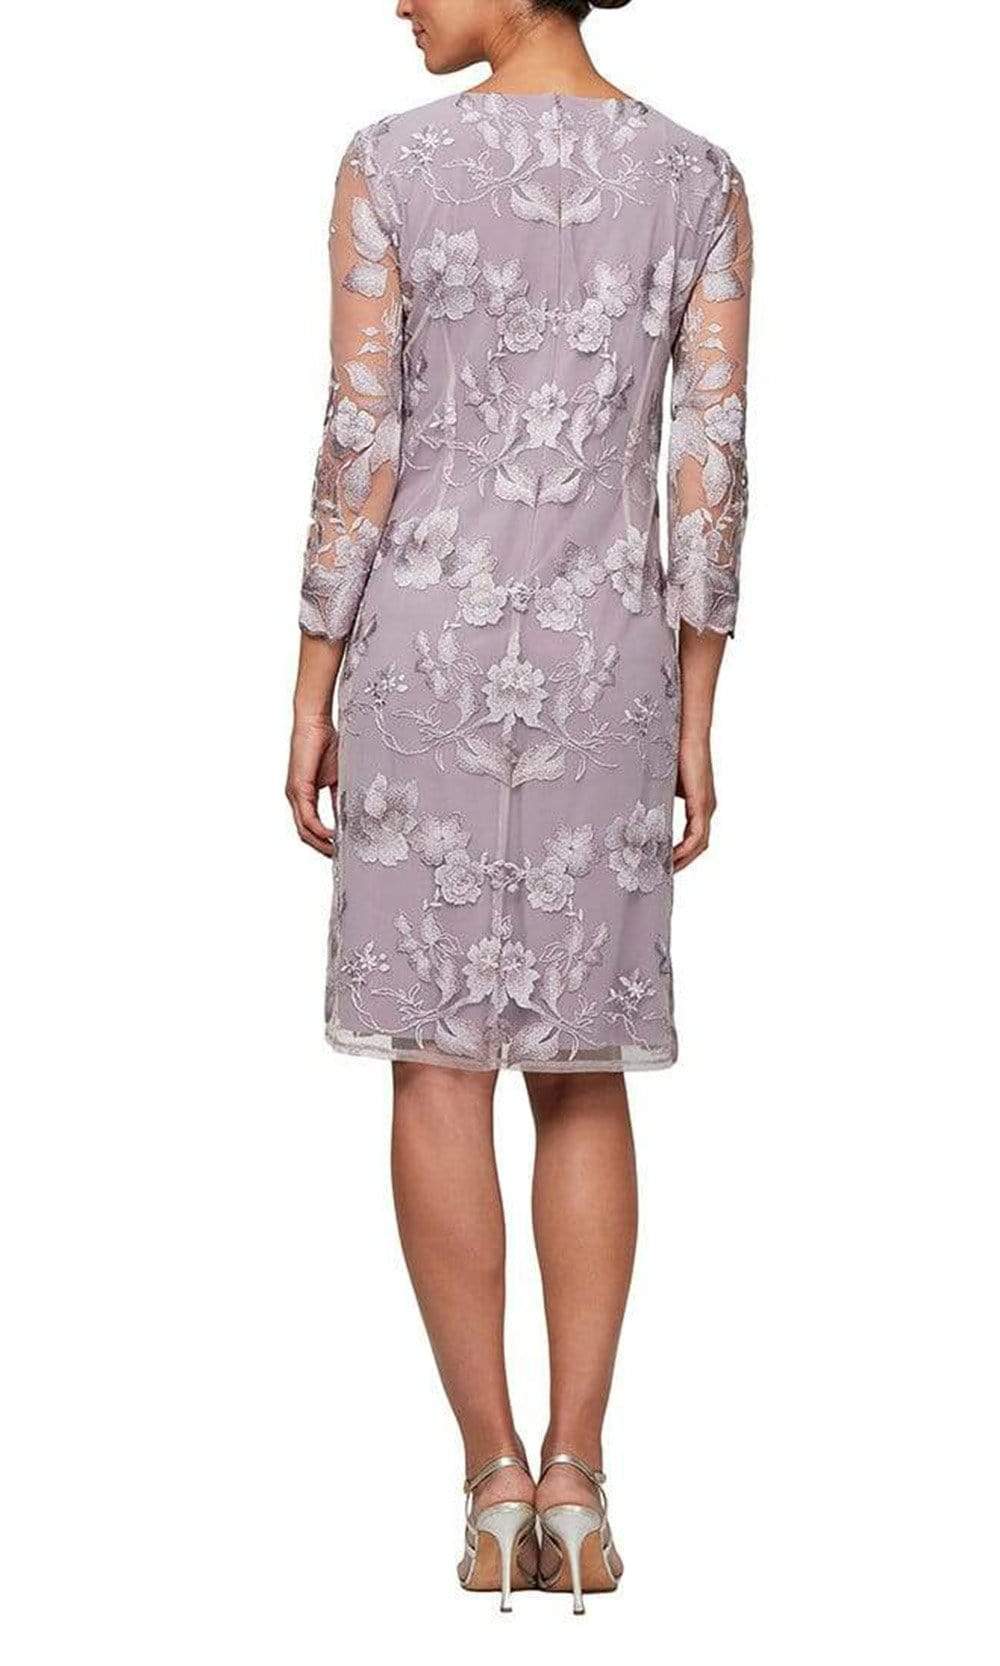 Alex Evenings - 81122202 Embroidered Lace Mock Jacket Jersey Dress